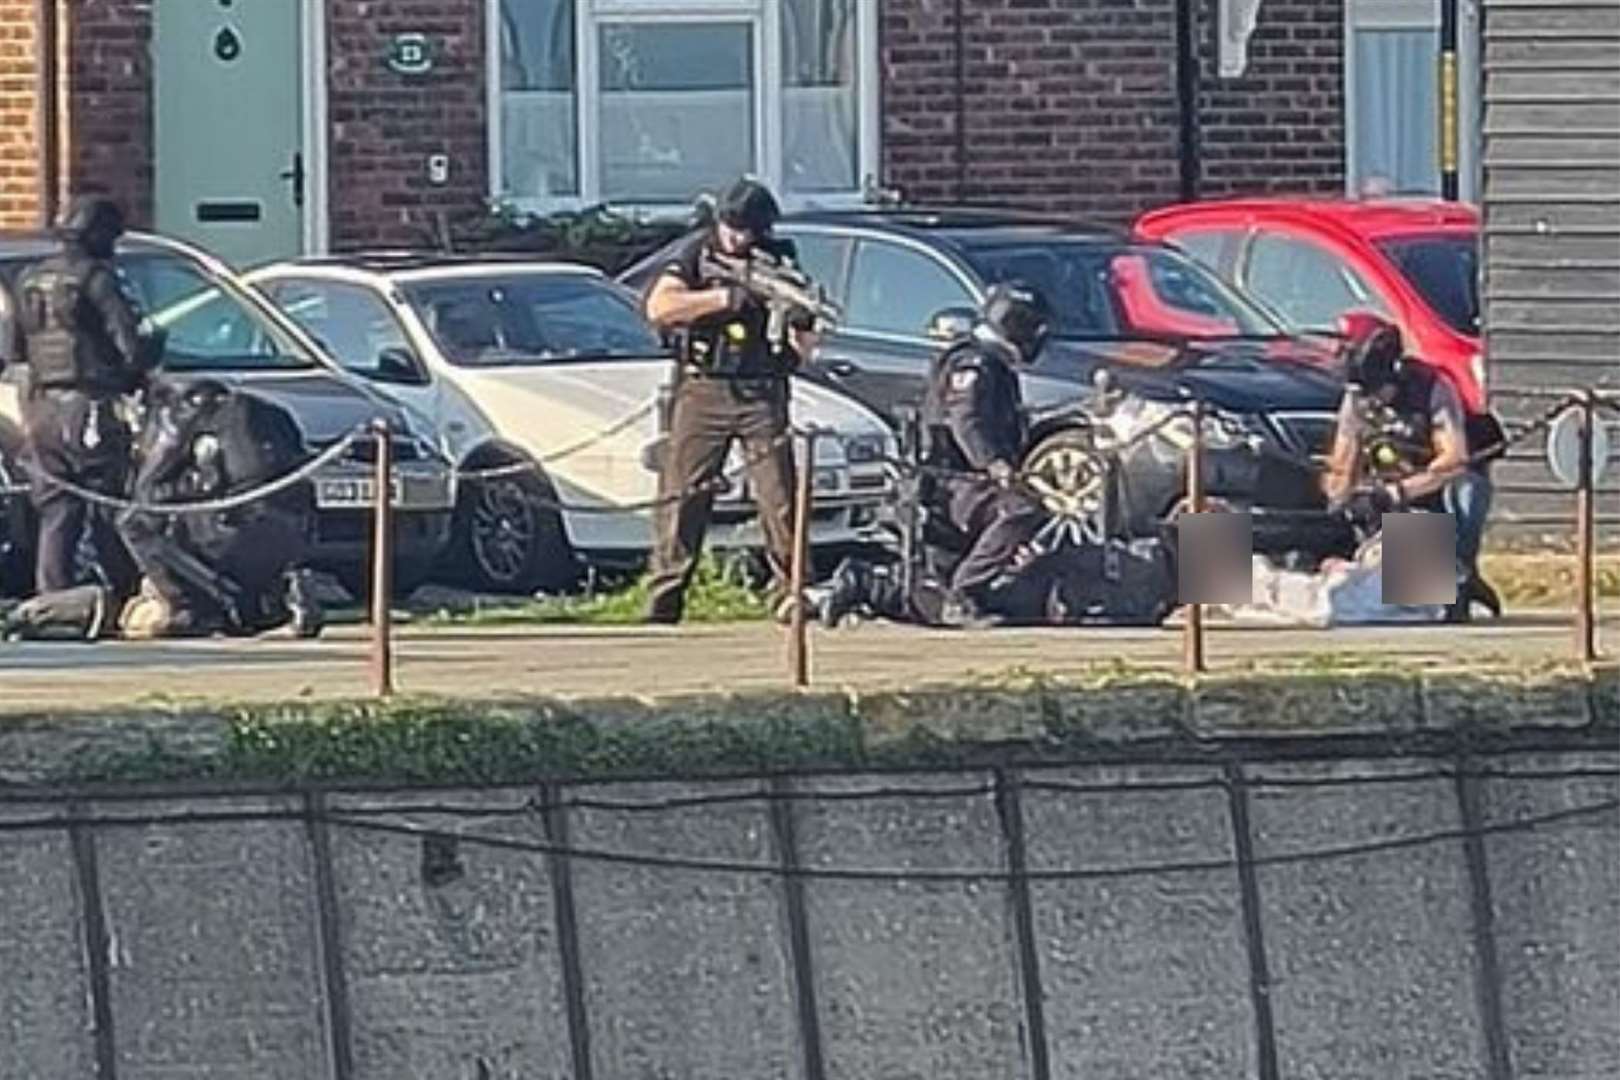 Armed police were seen arresting two people at gunpoint. Photo: Richard Plested